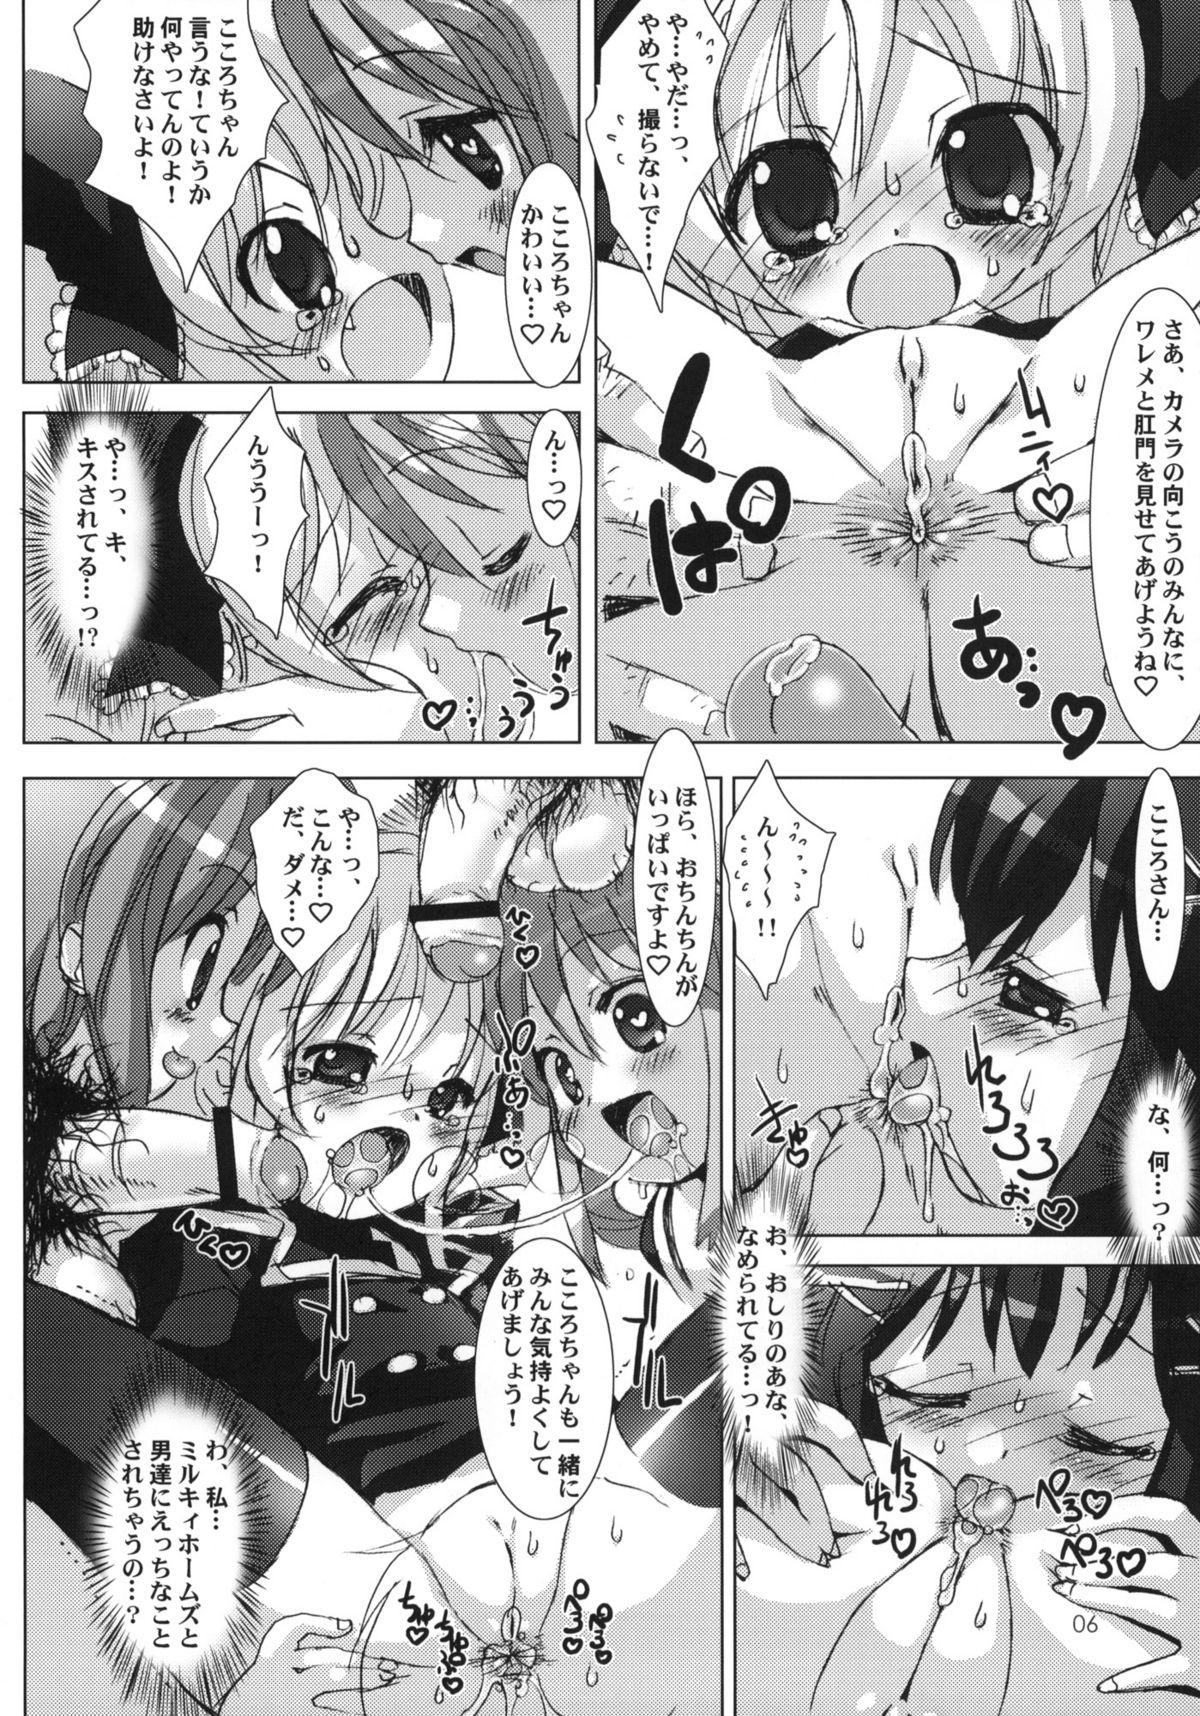 Massages Milky Angels - Tantei opera milky holmes Gostosas - Page 7